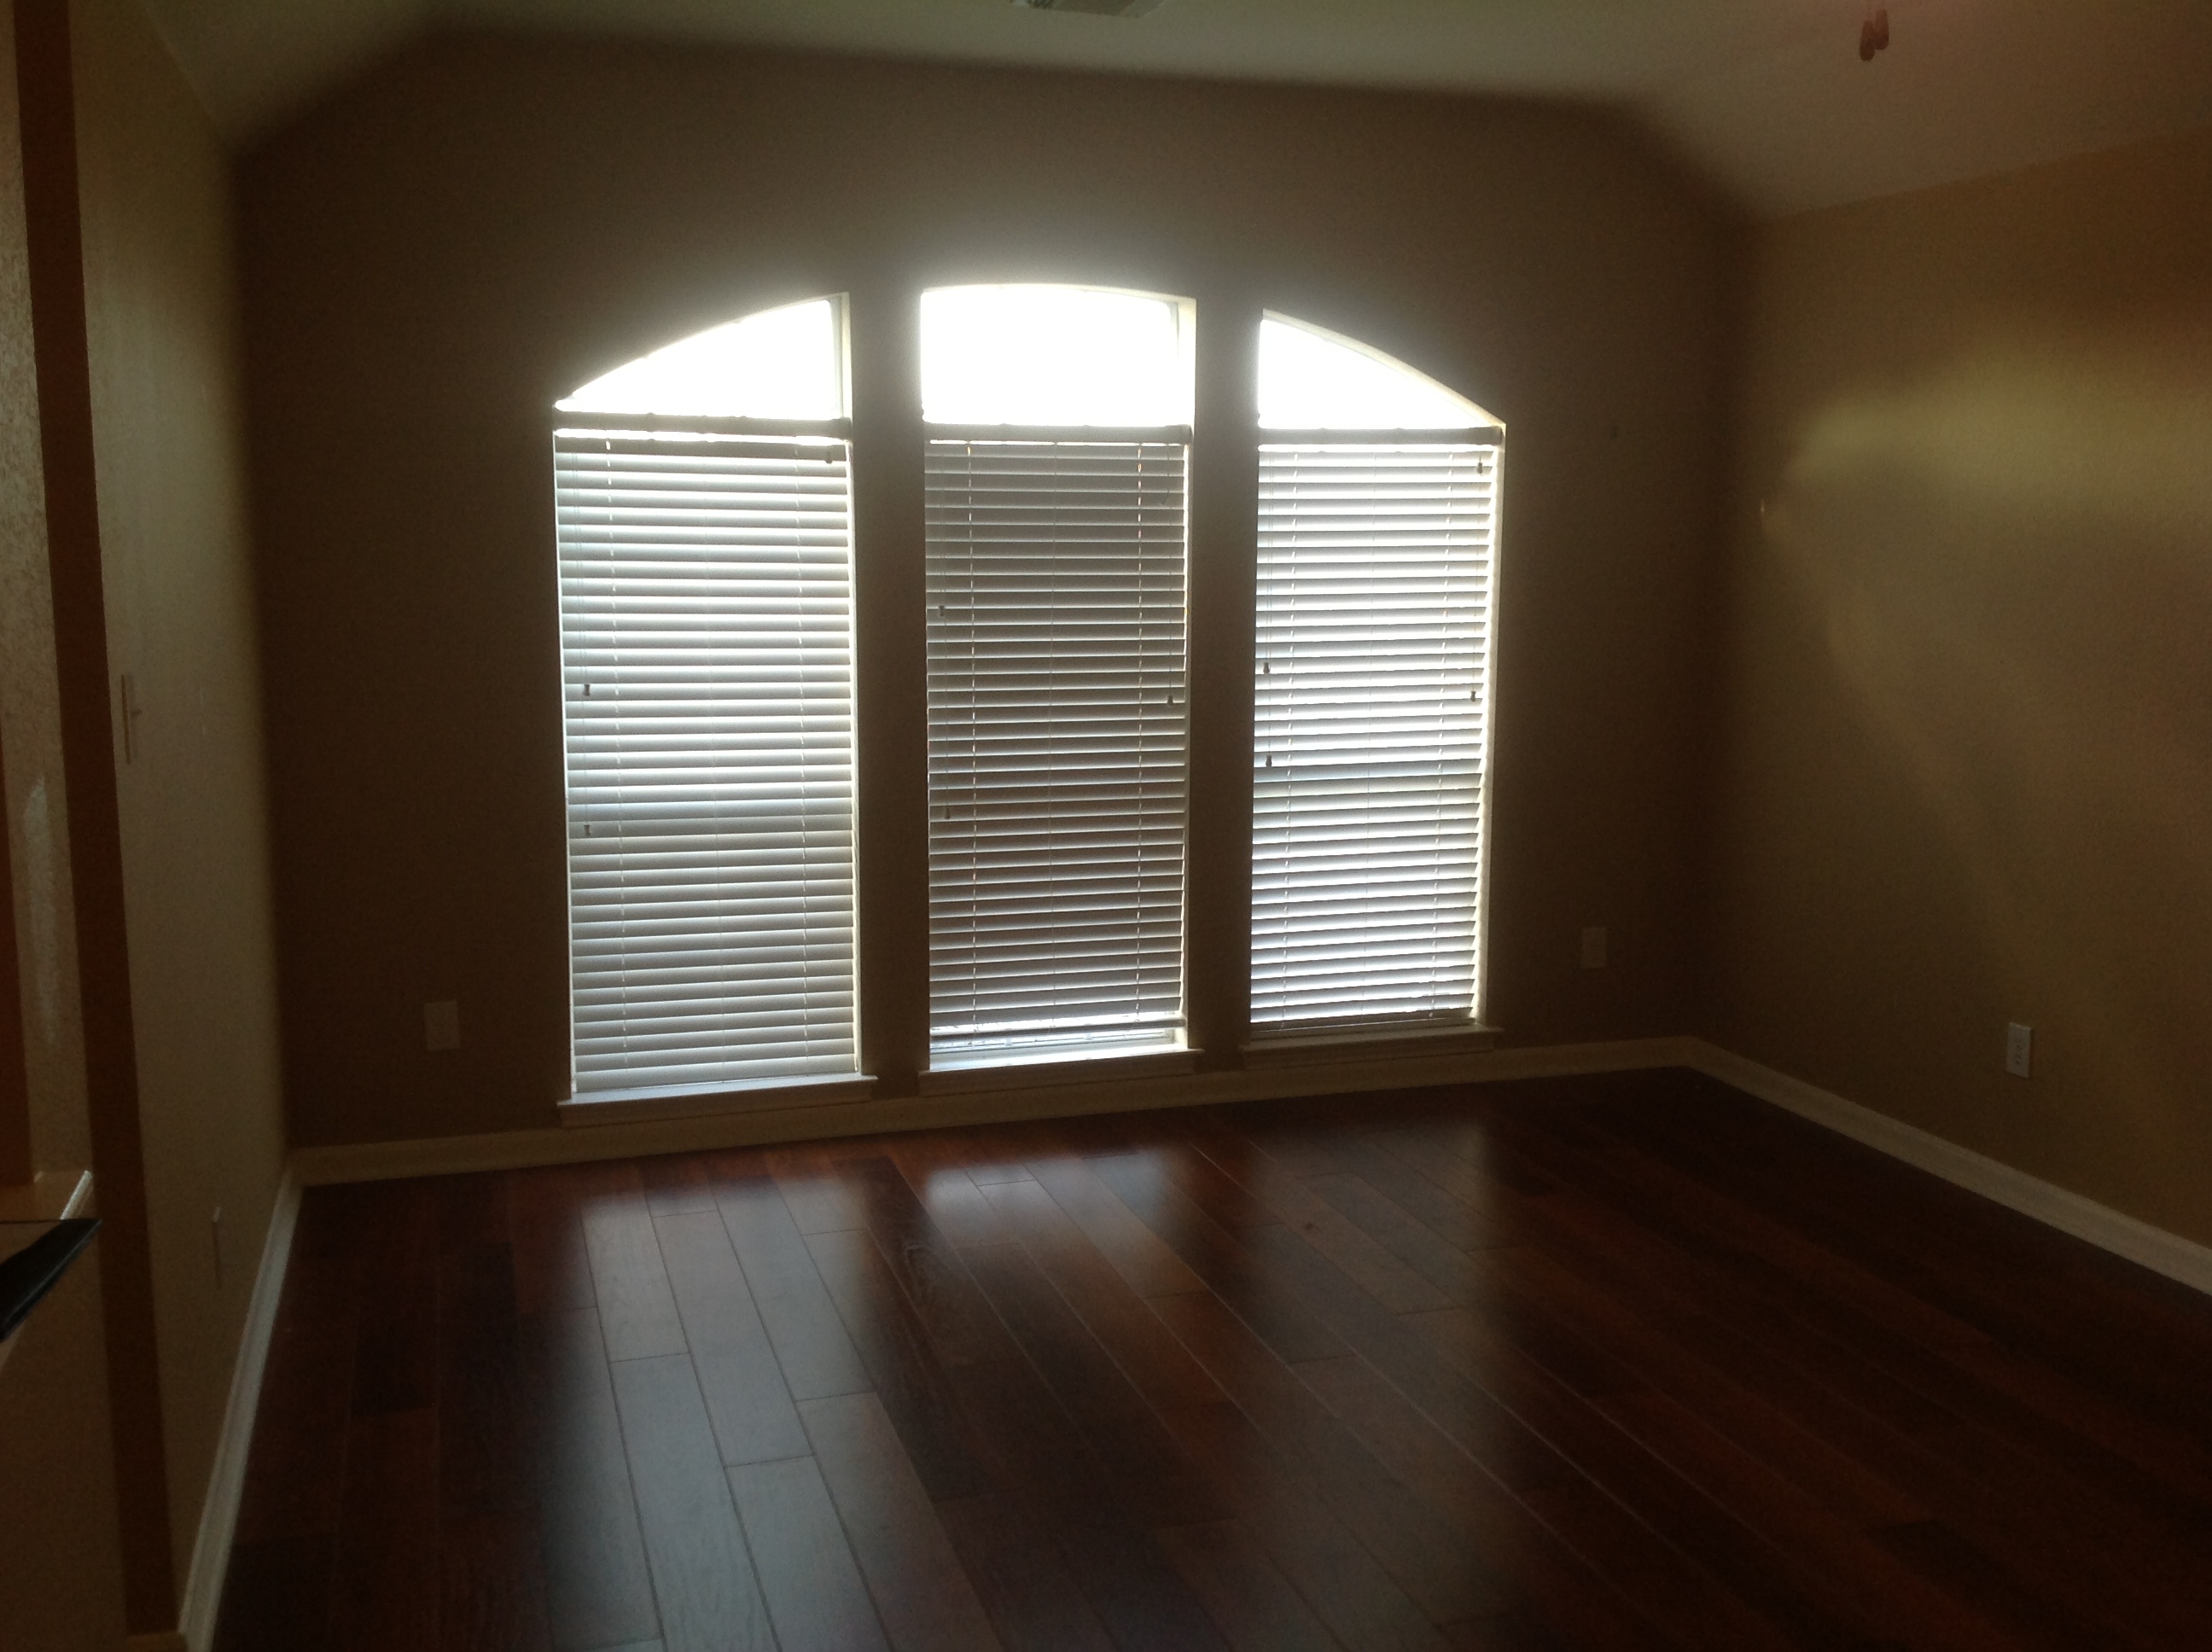 Vacant Home Staging - Game room BEFORE